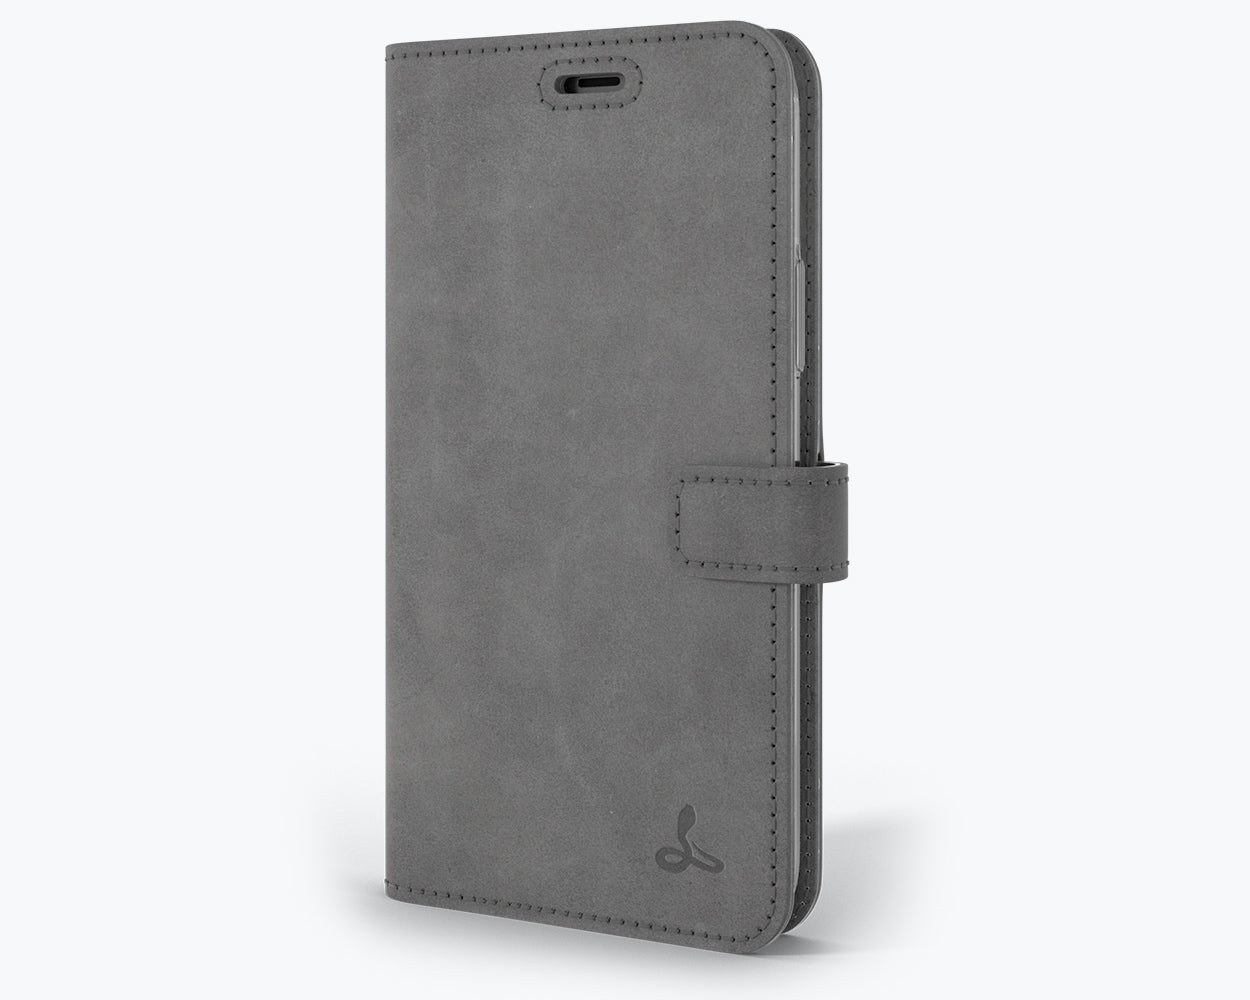 Apple iPhone 11 Pro Max - Vintage Leather Wallet Grey Apple iPhone 11 Pro Max - Snakehive UK